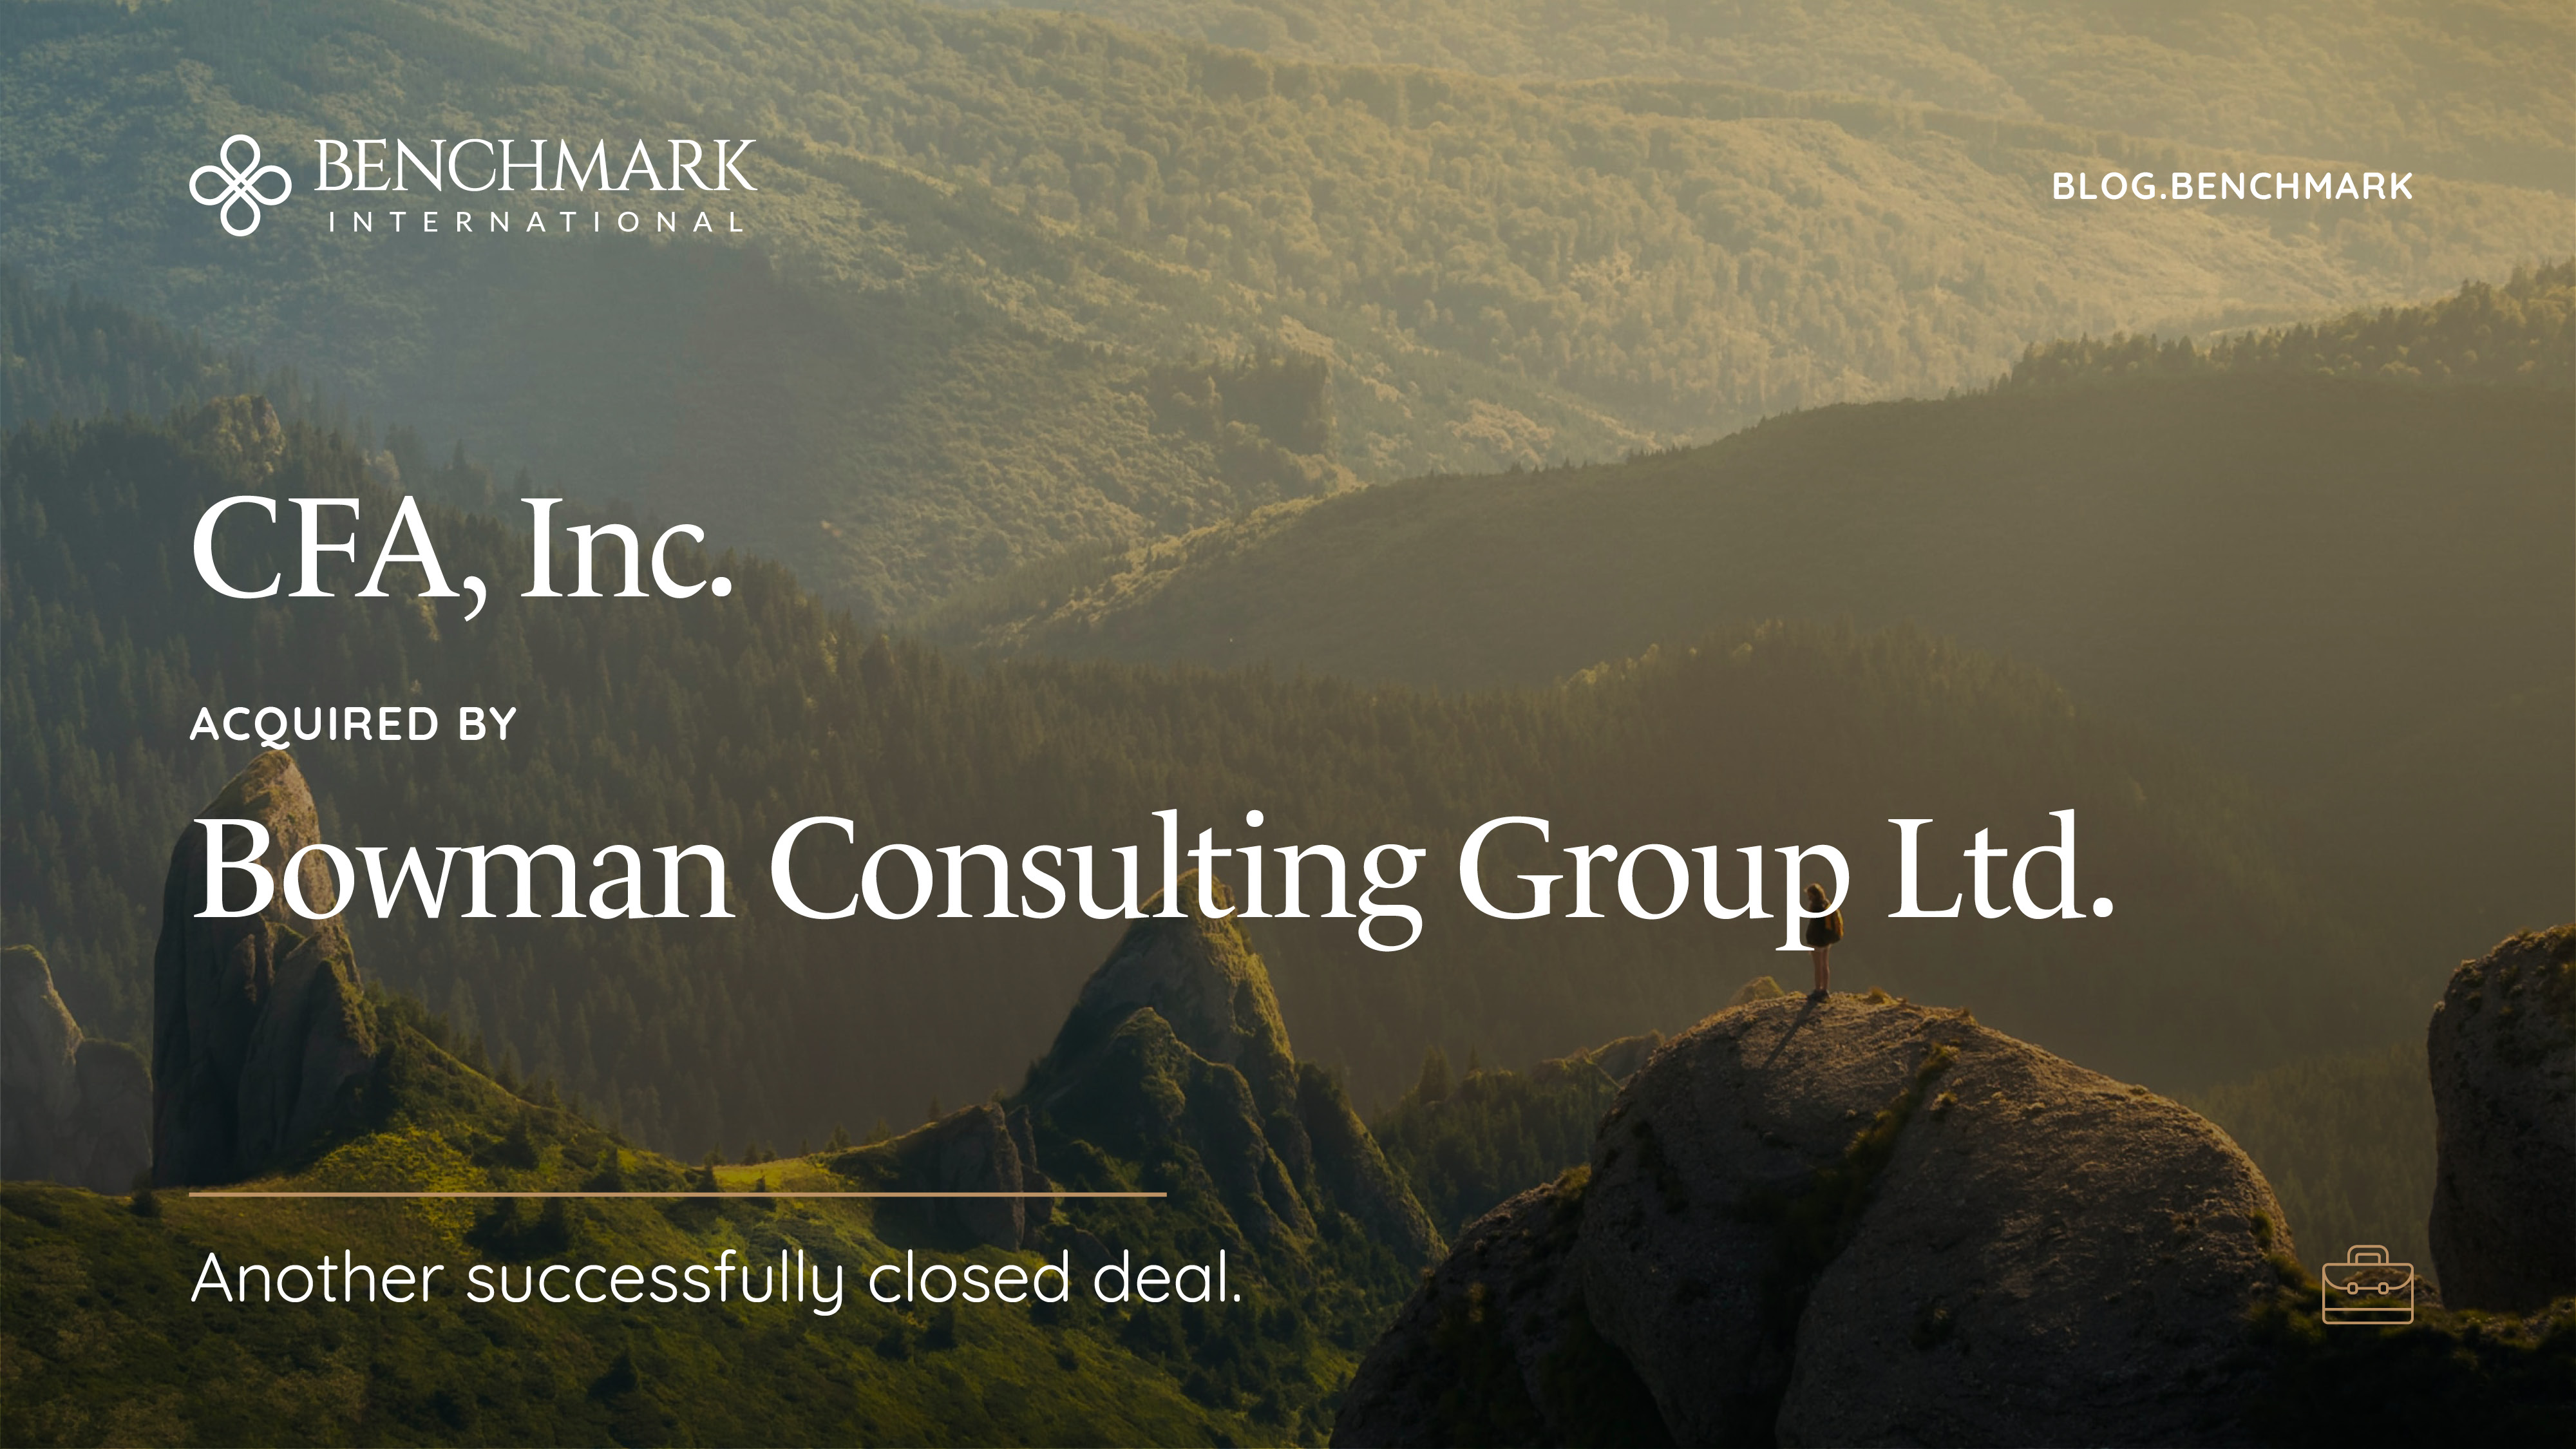 Benchmark International Facilitated The Transaction Between CFA, Inc. And Bowman Consulting Group Ltd.